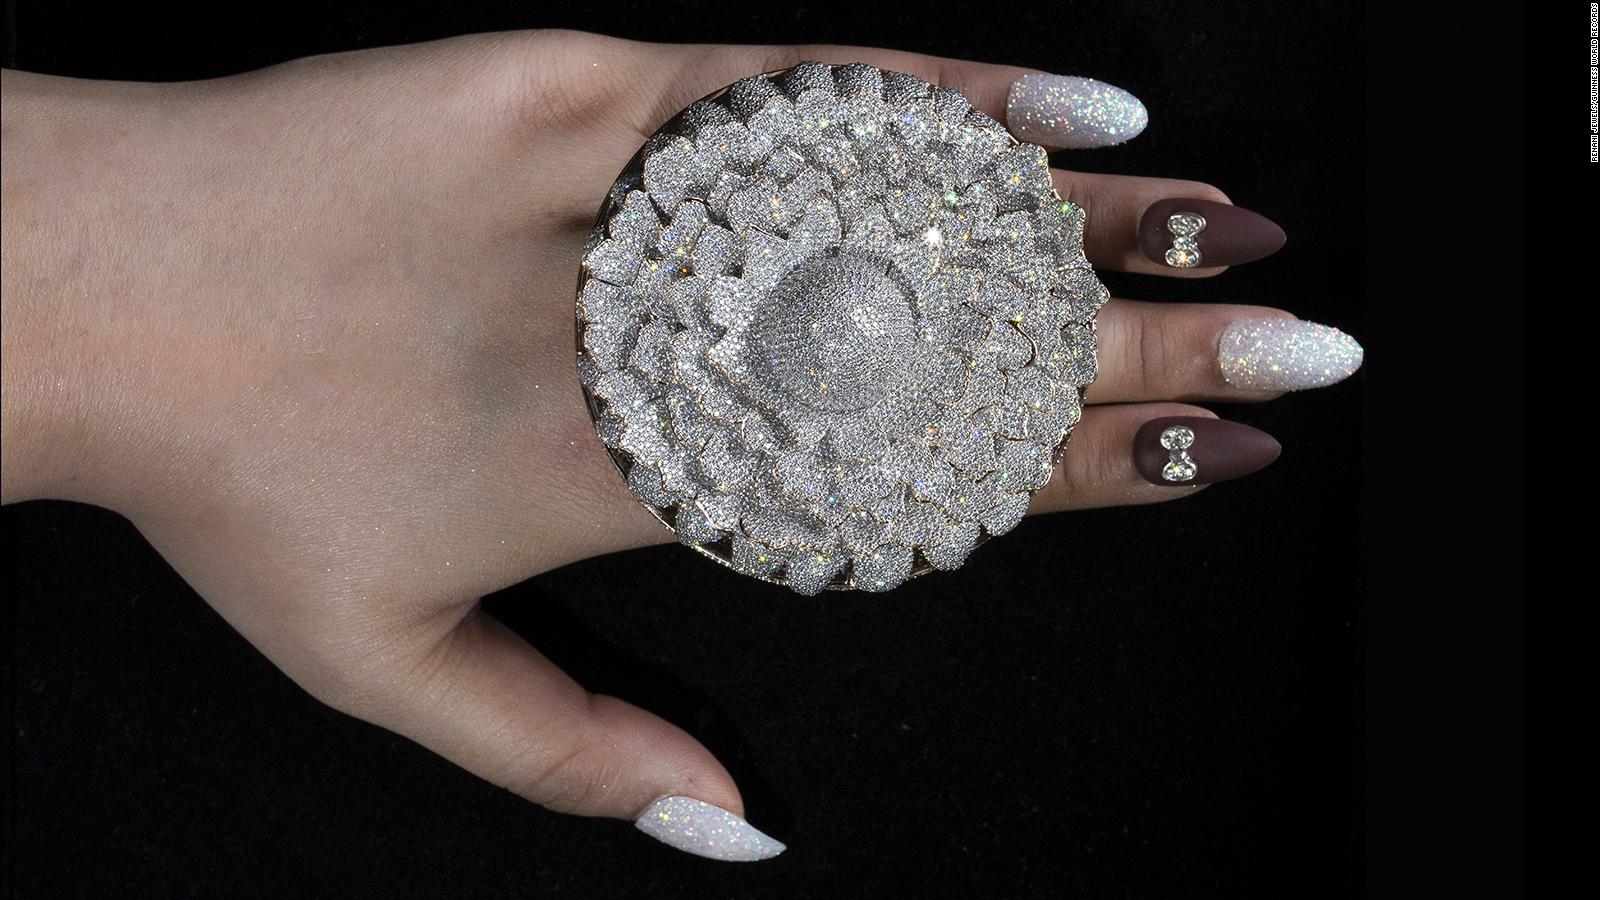 A ring with 12,638 diamonds sets a Guinness World Record - CNN Style